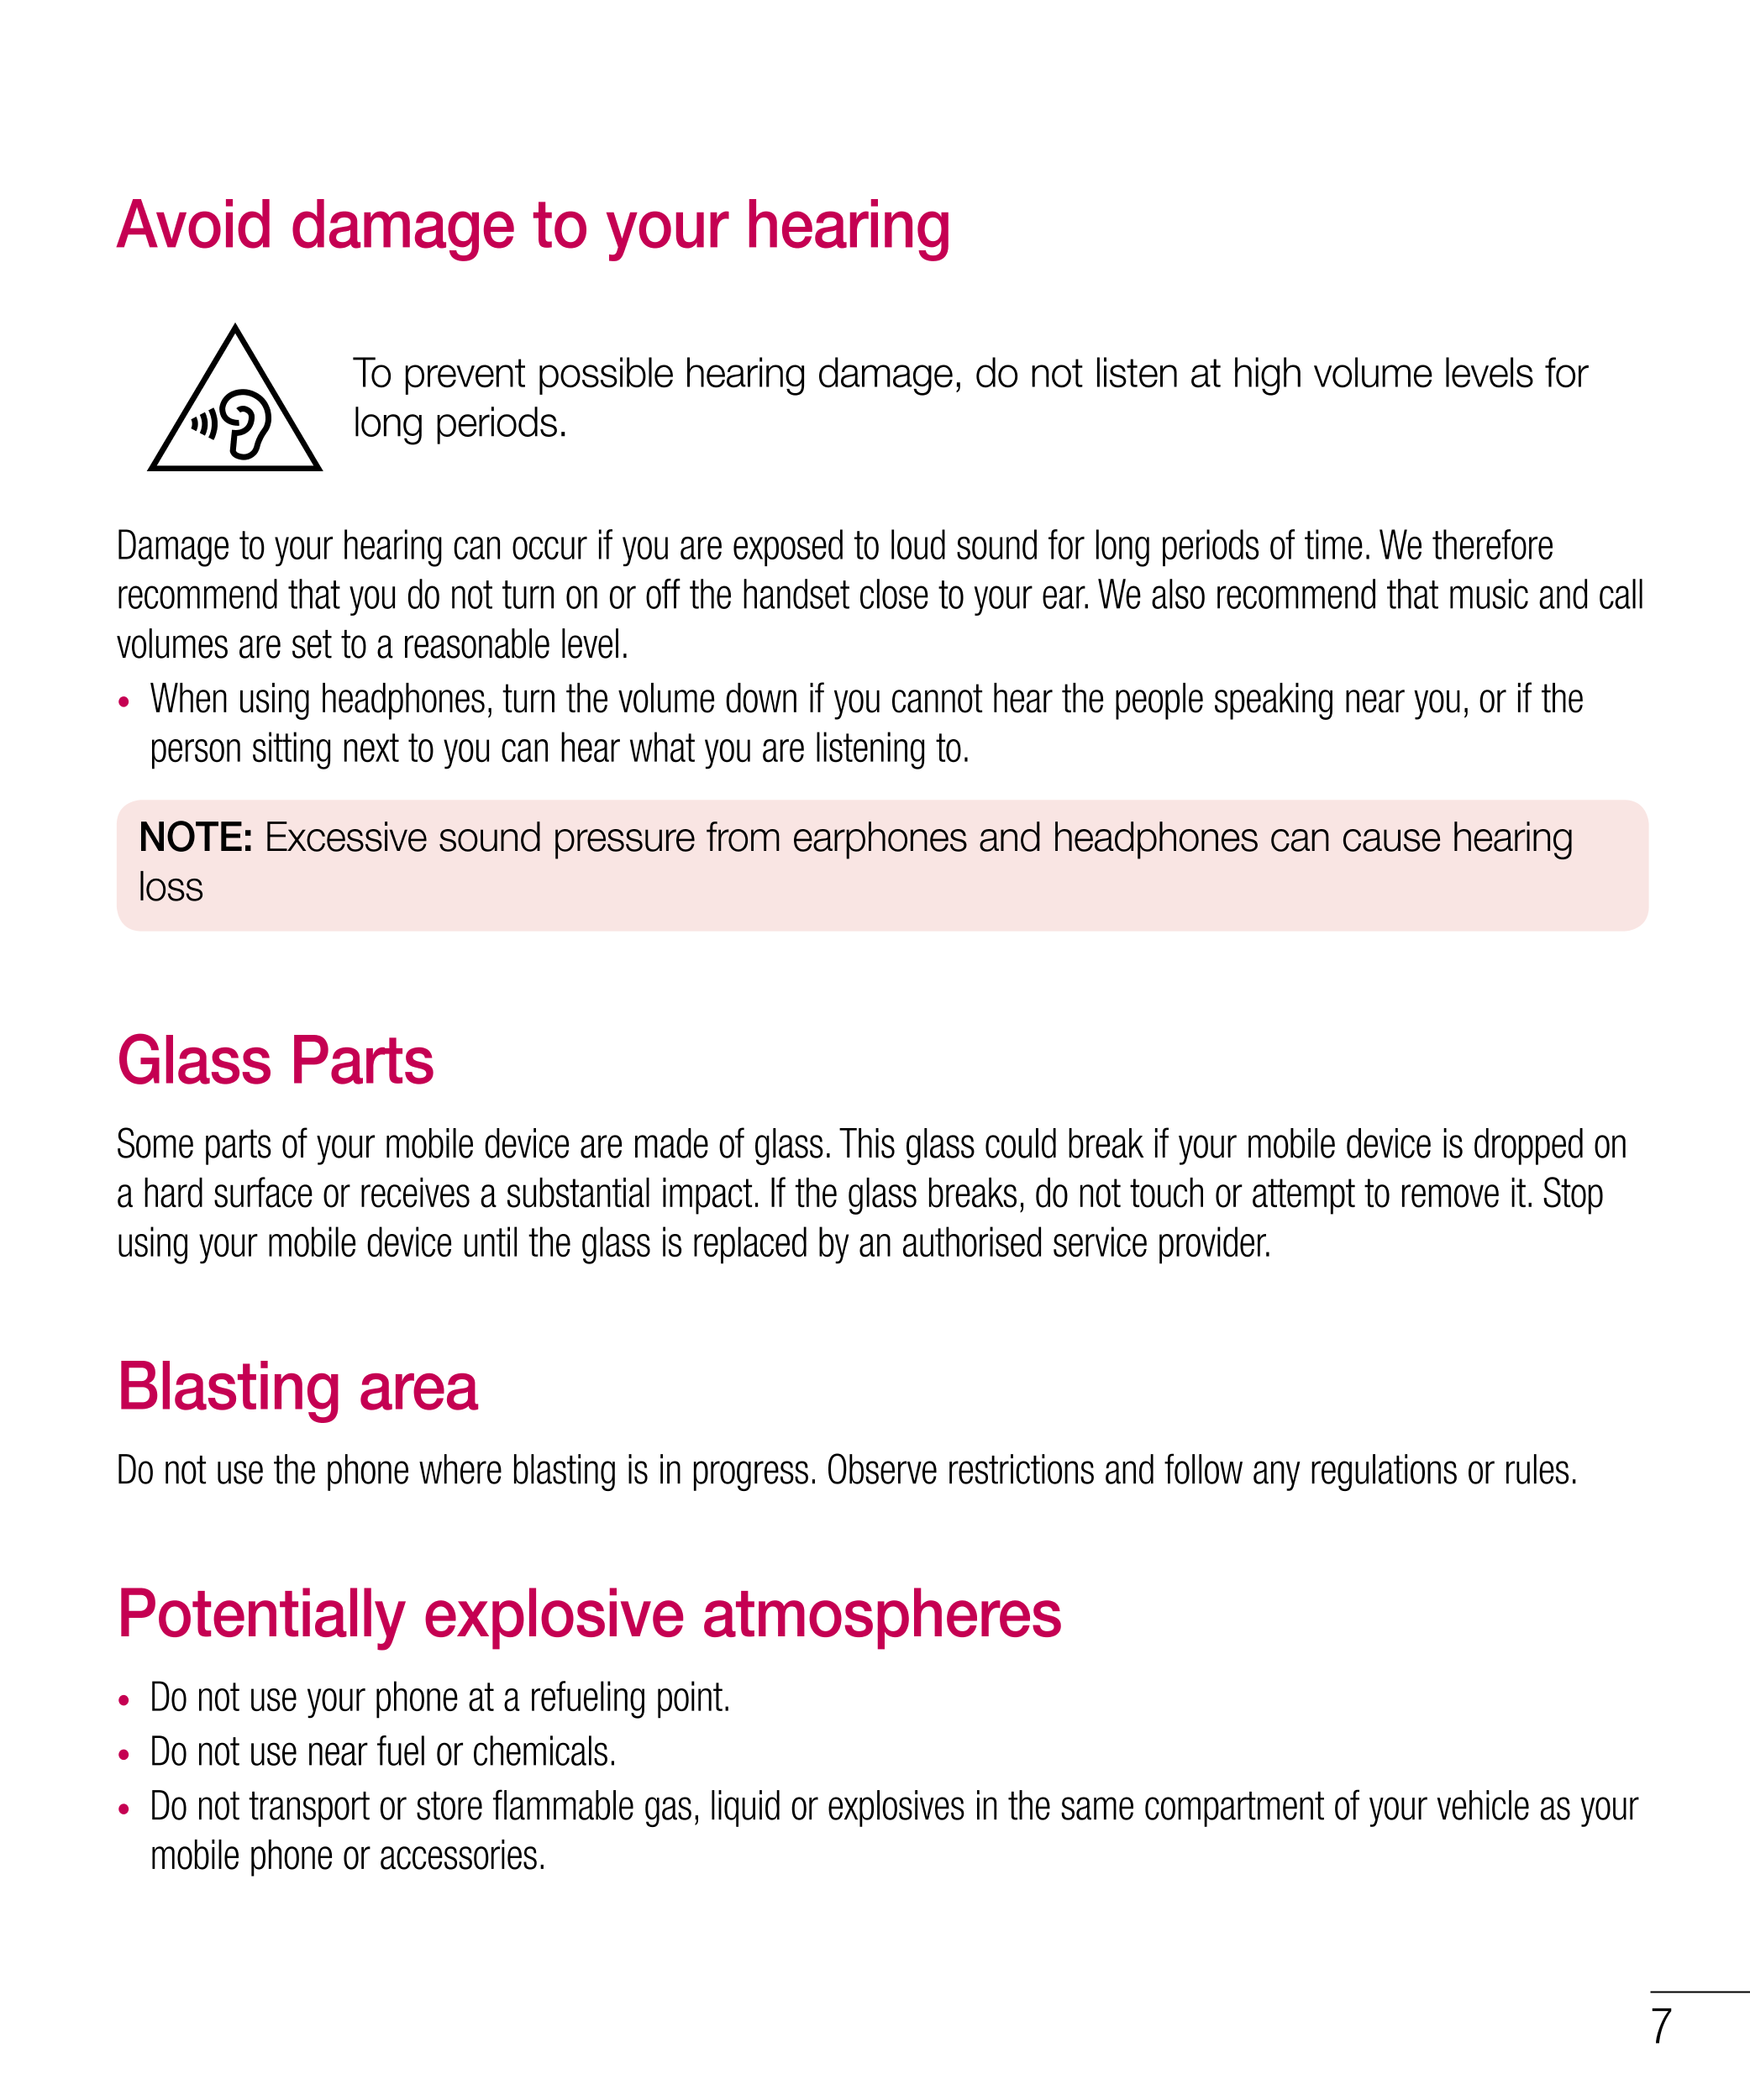 Avoid damage to your hearing
To prevent possible hearing damage, do not listen at high volume levels for 
long periods.
Damage t